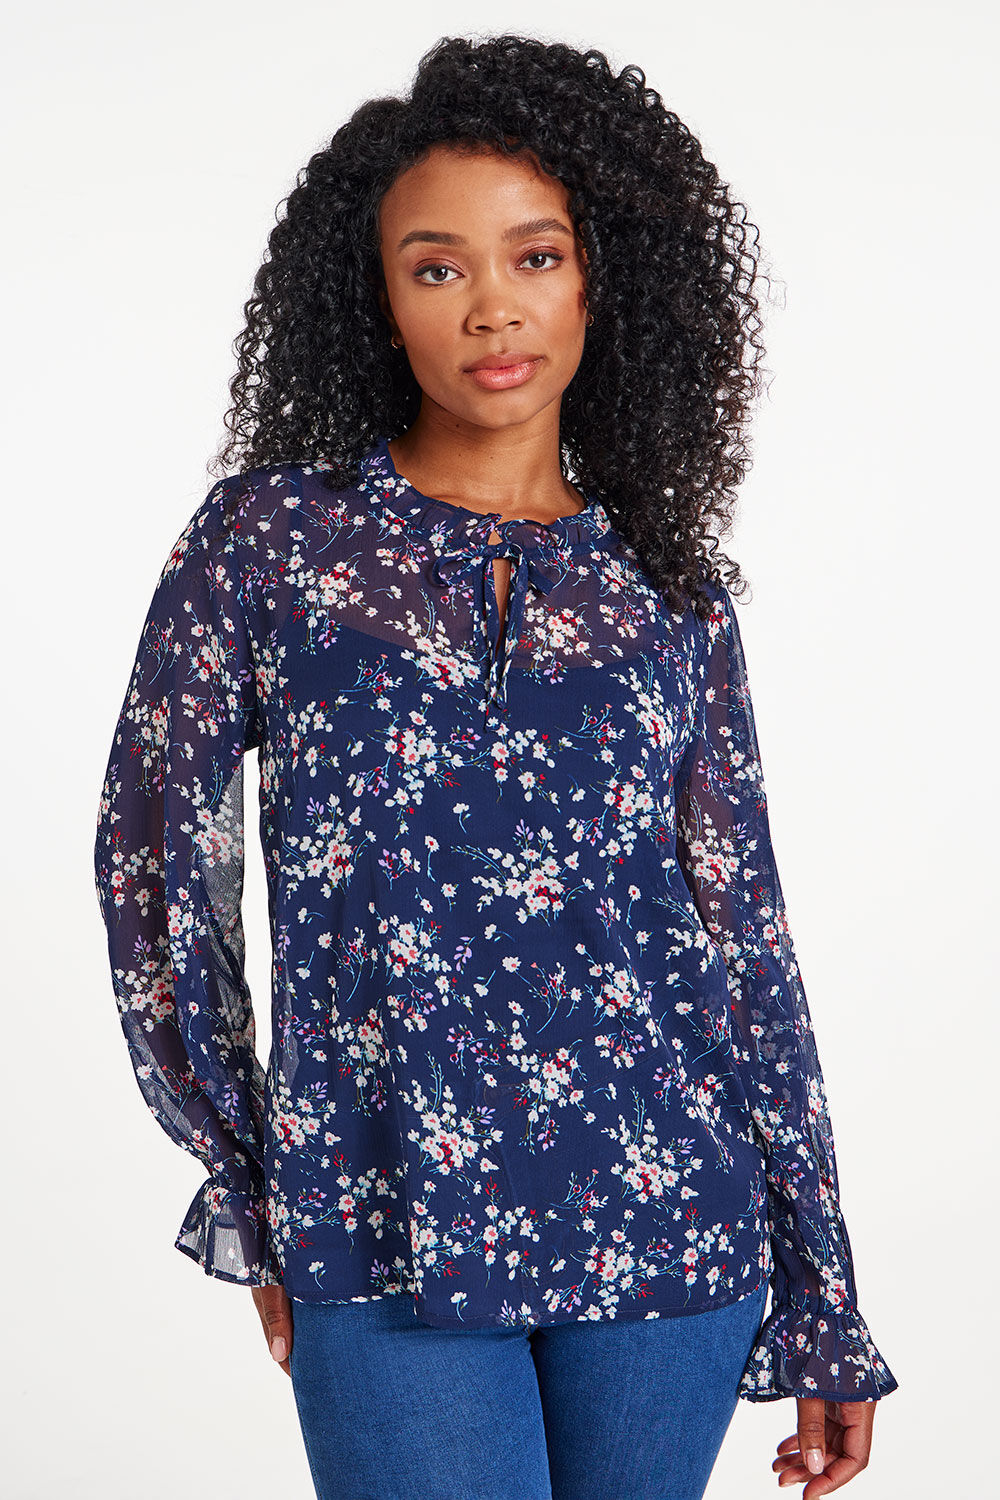 Bonmarche Navy Long Sleeve Floral Overhead Blouse With Cami Top, Size: 14